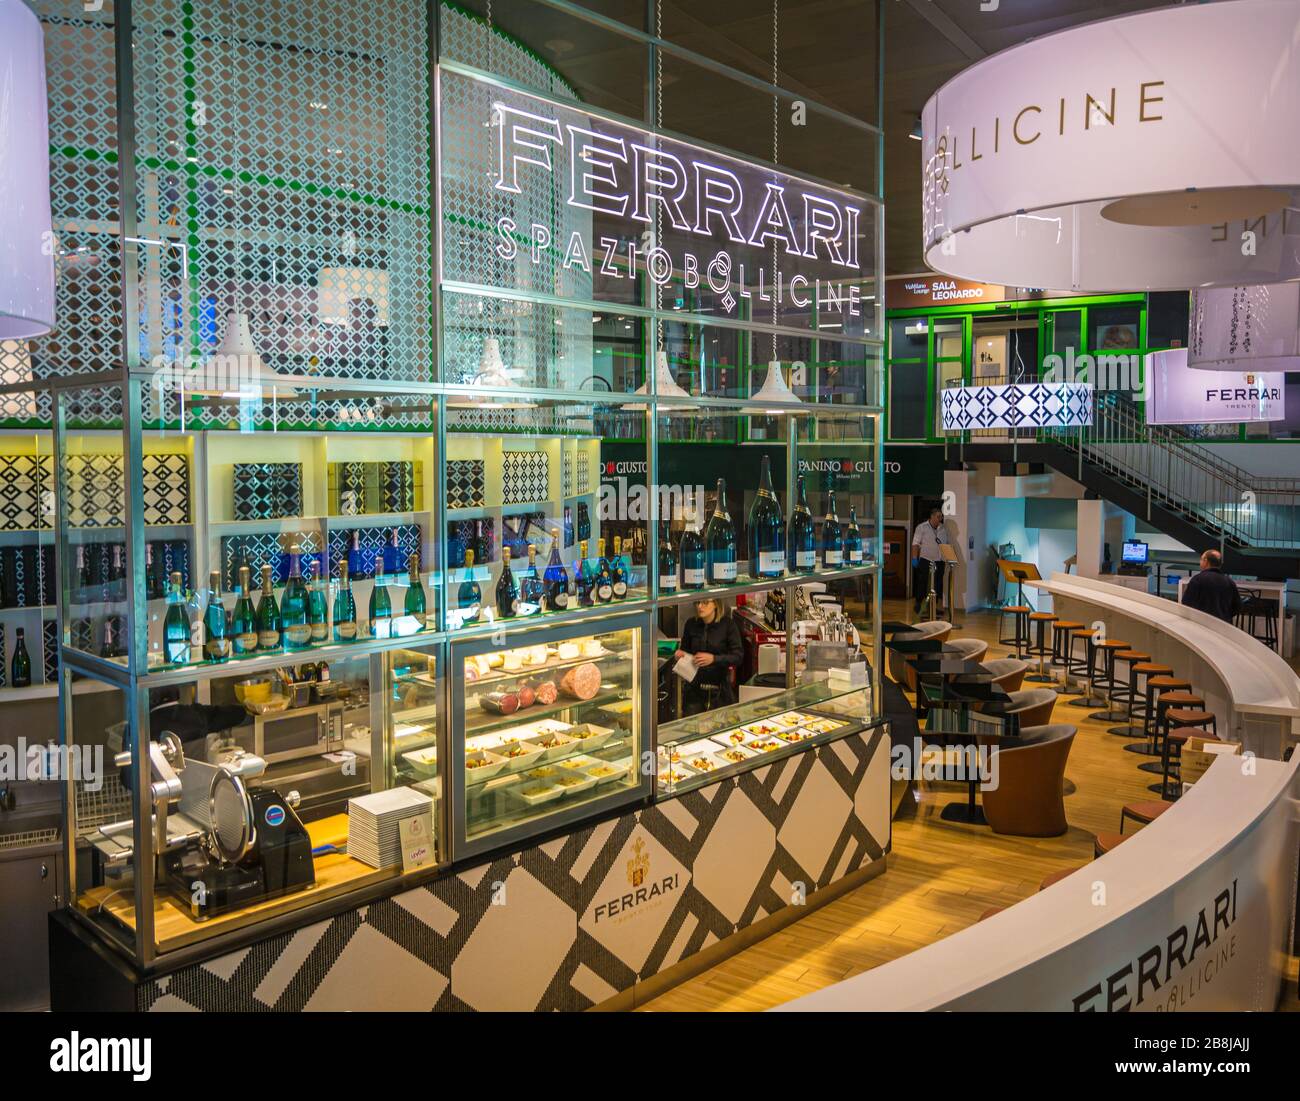 Linate airport, Milan, Lombardy, Italy, Europe - Ferrari Spazio Bollicine is inspired by the desire to bring the Trento Doc wine into the symbols. Stock Photo